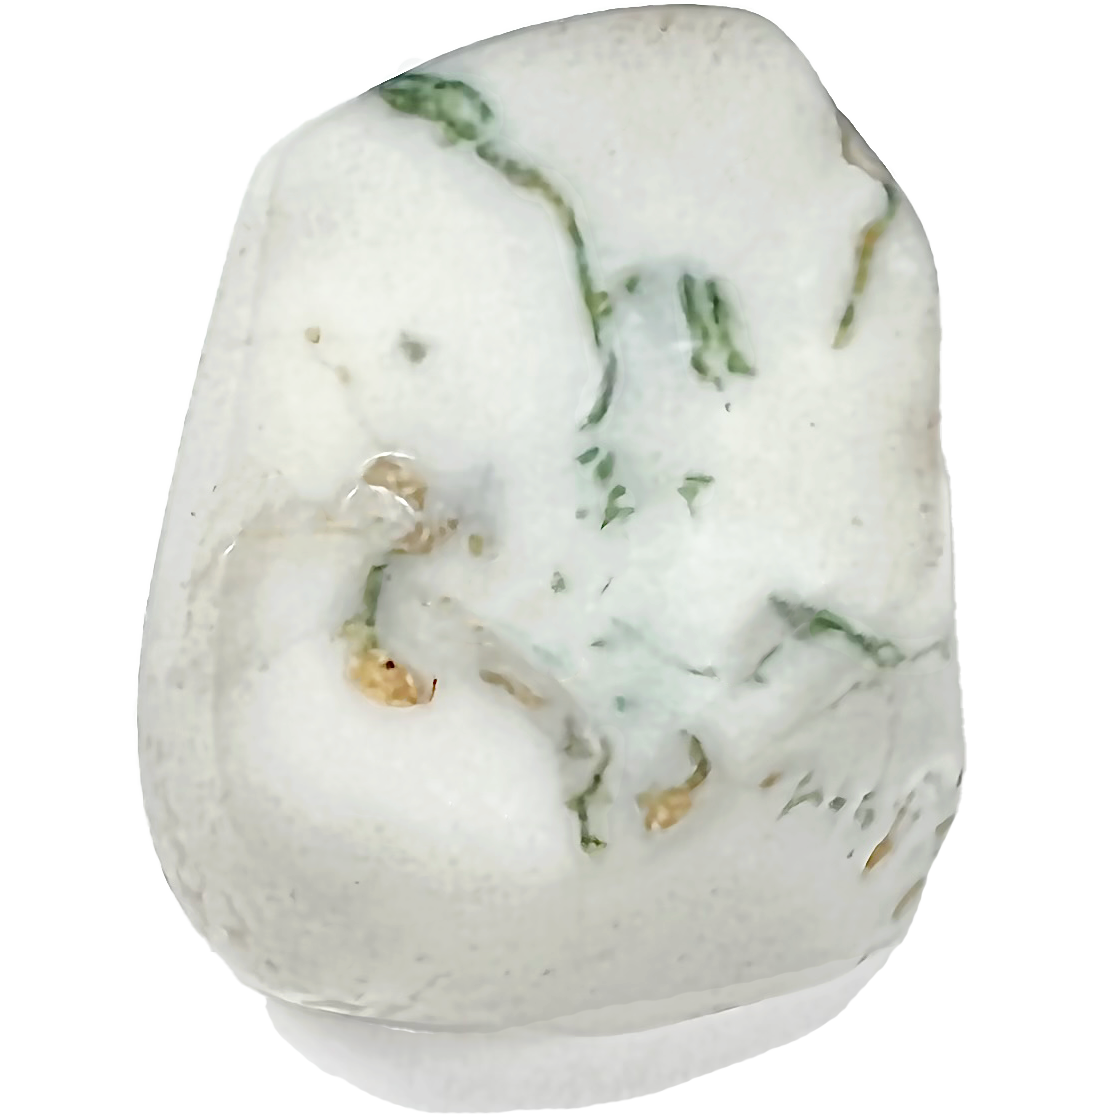 A tumbled green tree agate stone.  The stone is white with green streaked veins.